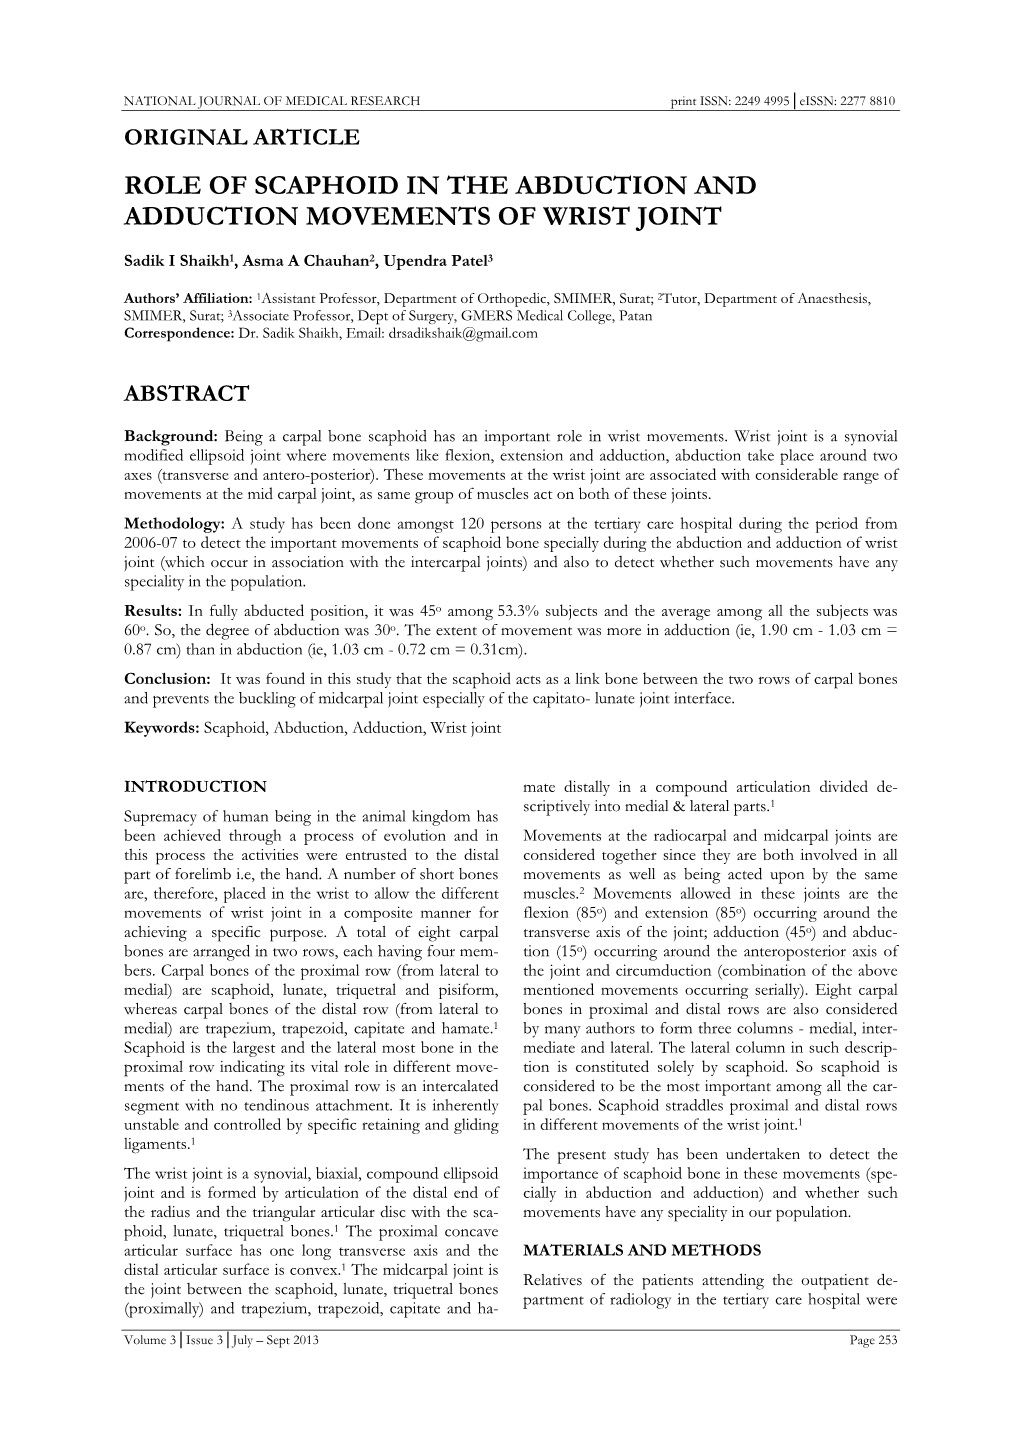 Role of Scaphoid in the Abduction and Adduction Movements of Wrist Joint